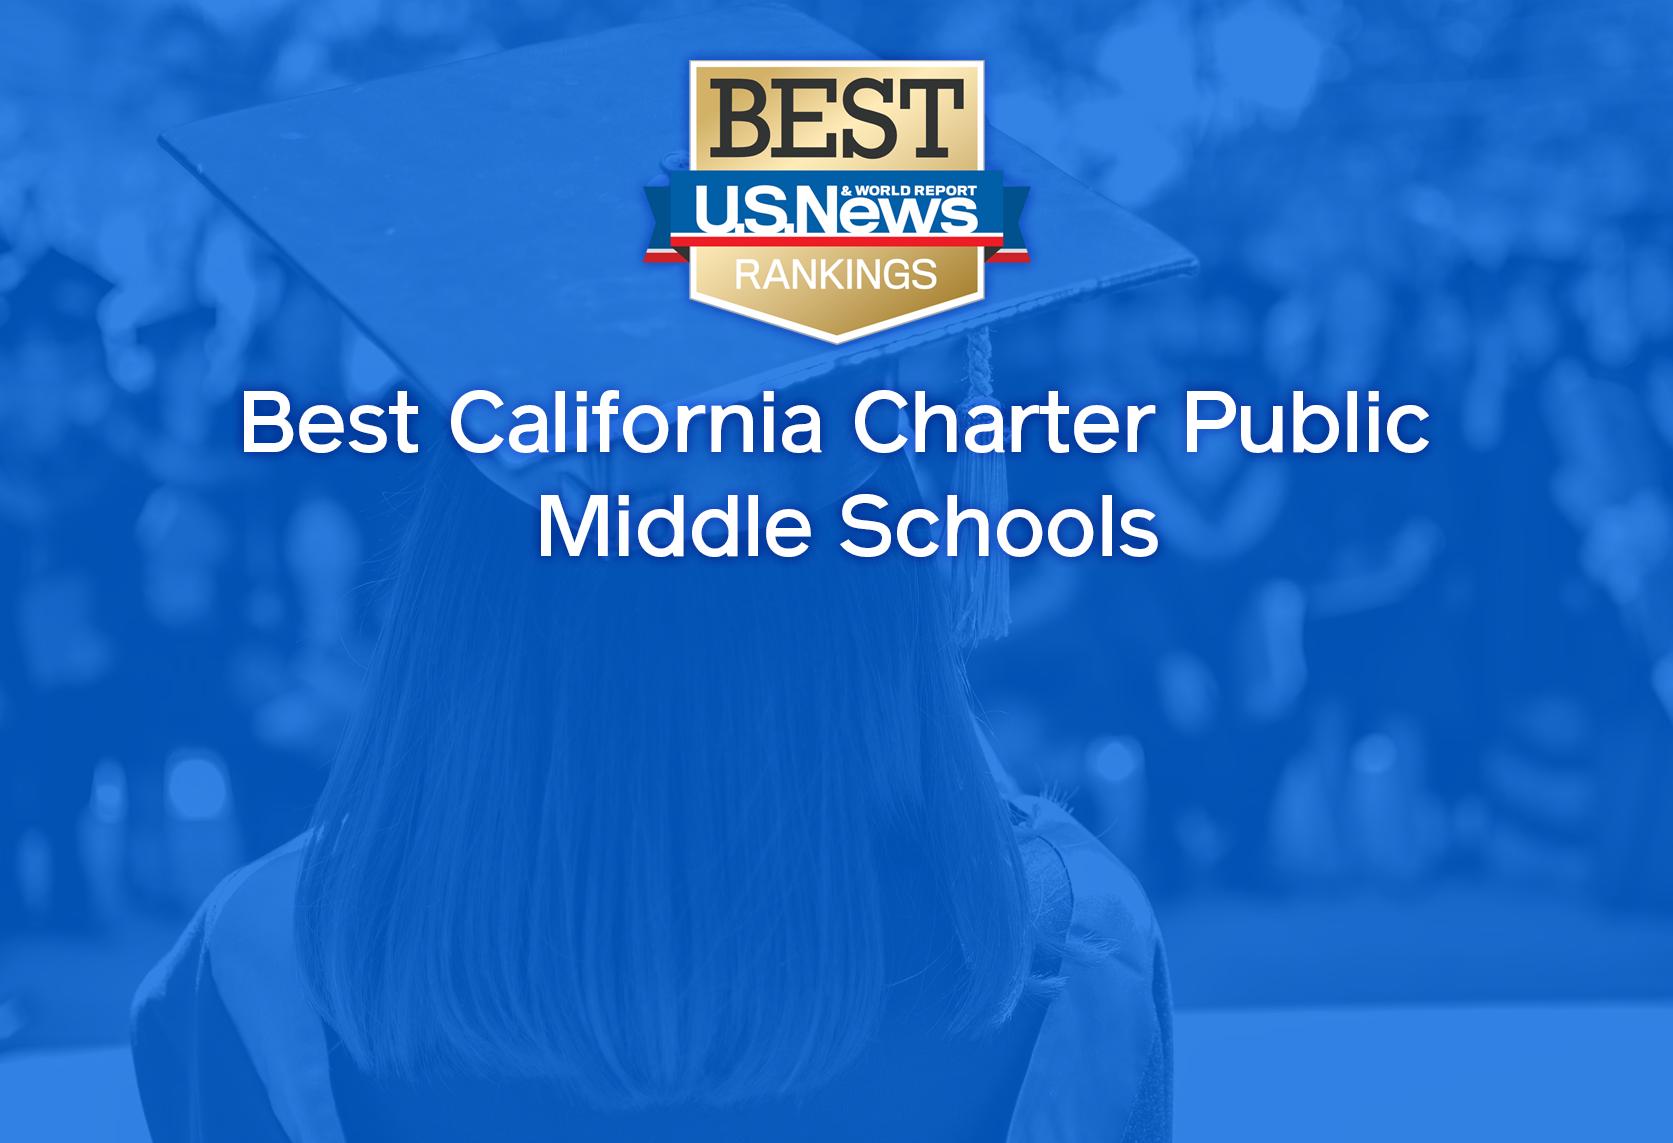 U.S. News And World Report Best Charter Public Middle Schools 2 #keepProtocol